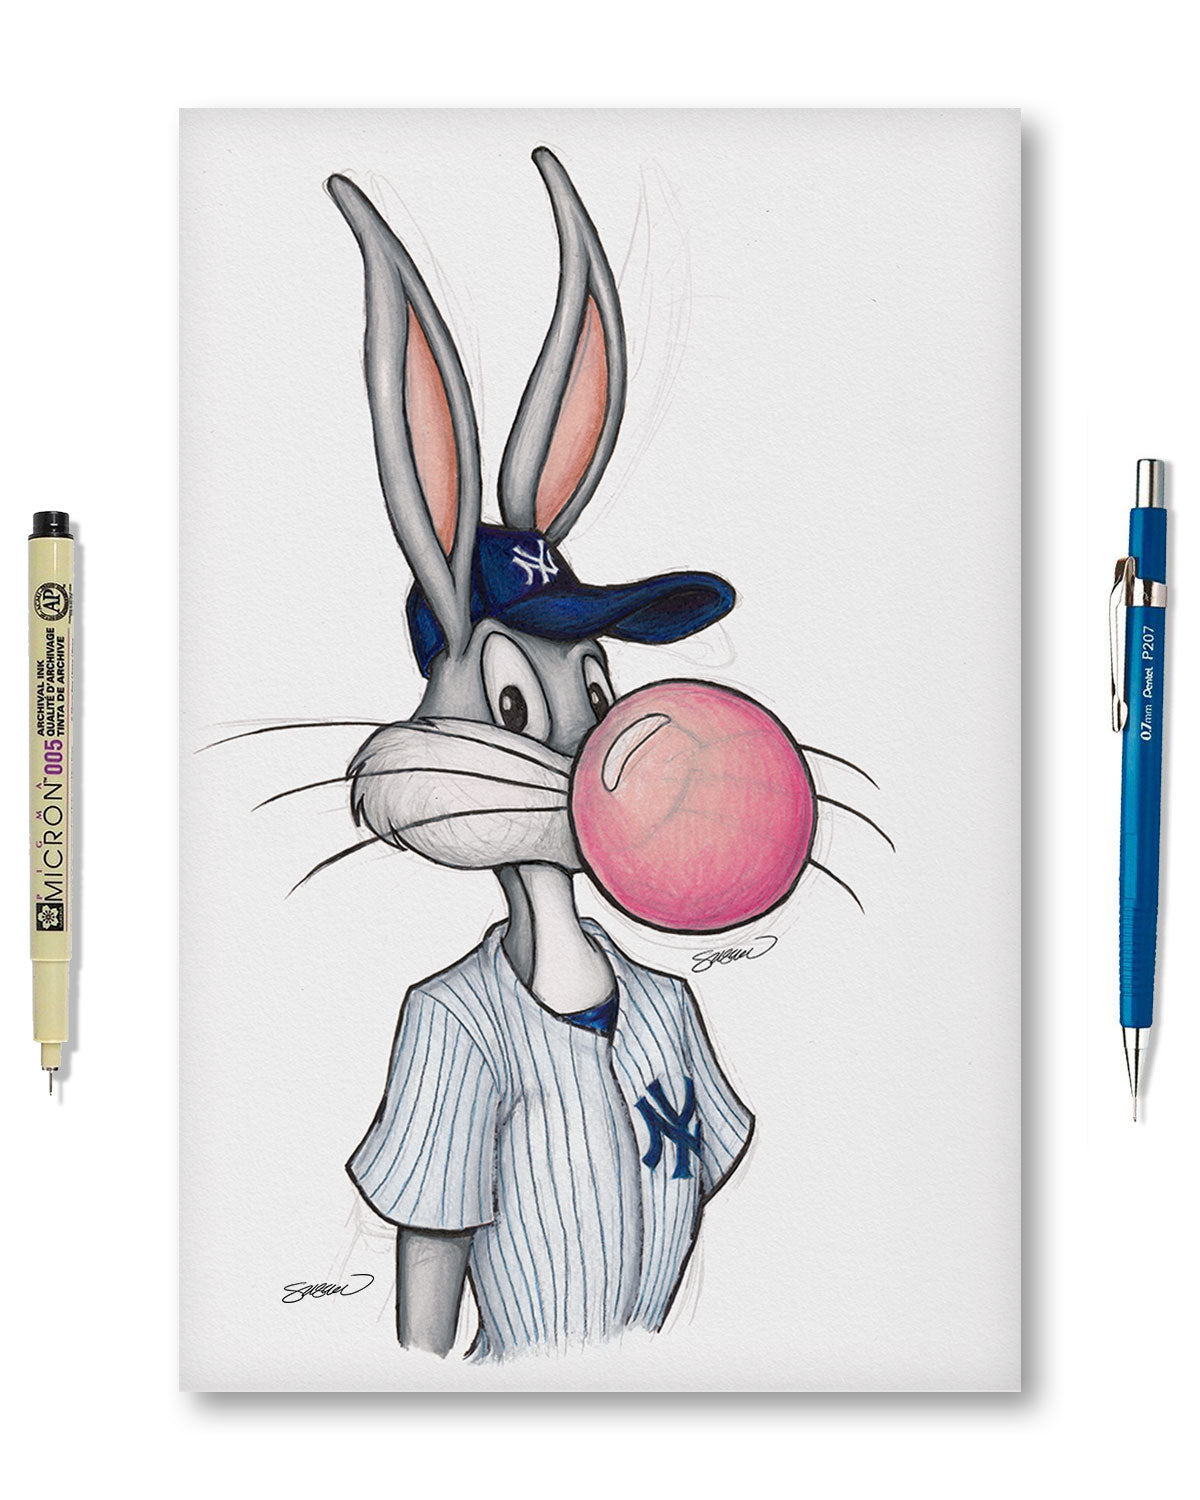 Bugs Bunny at Bat for the Yankees